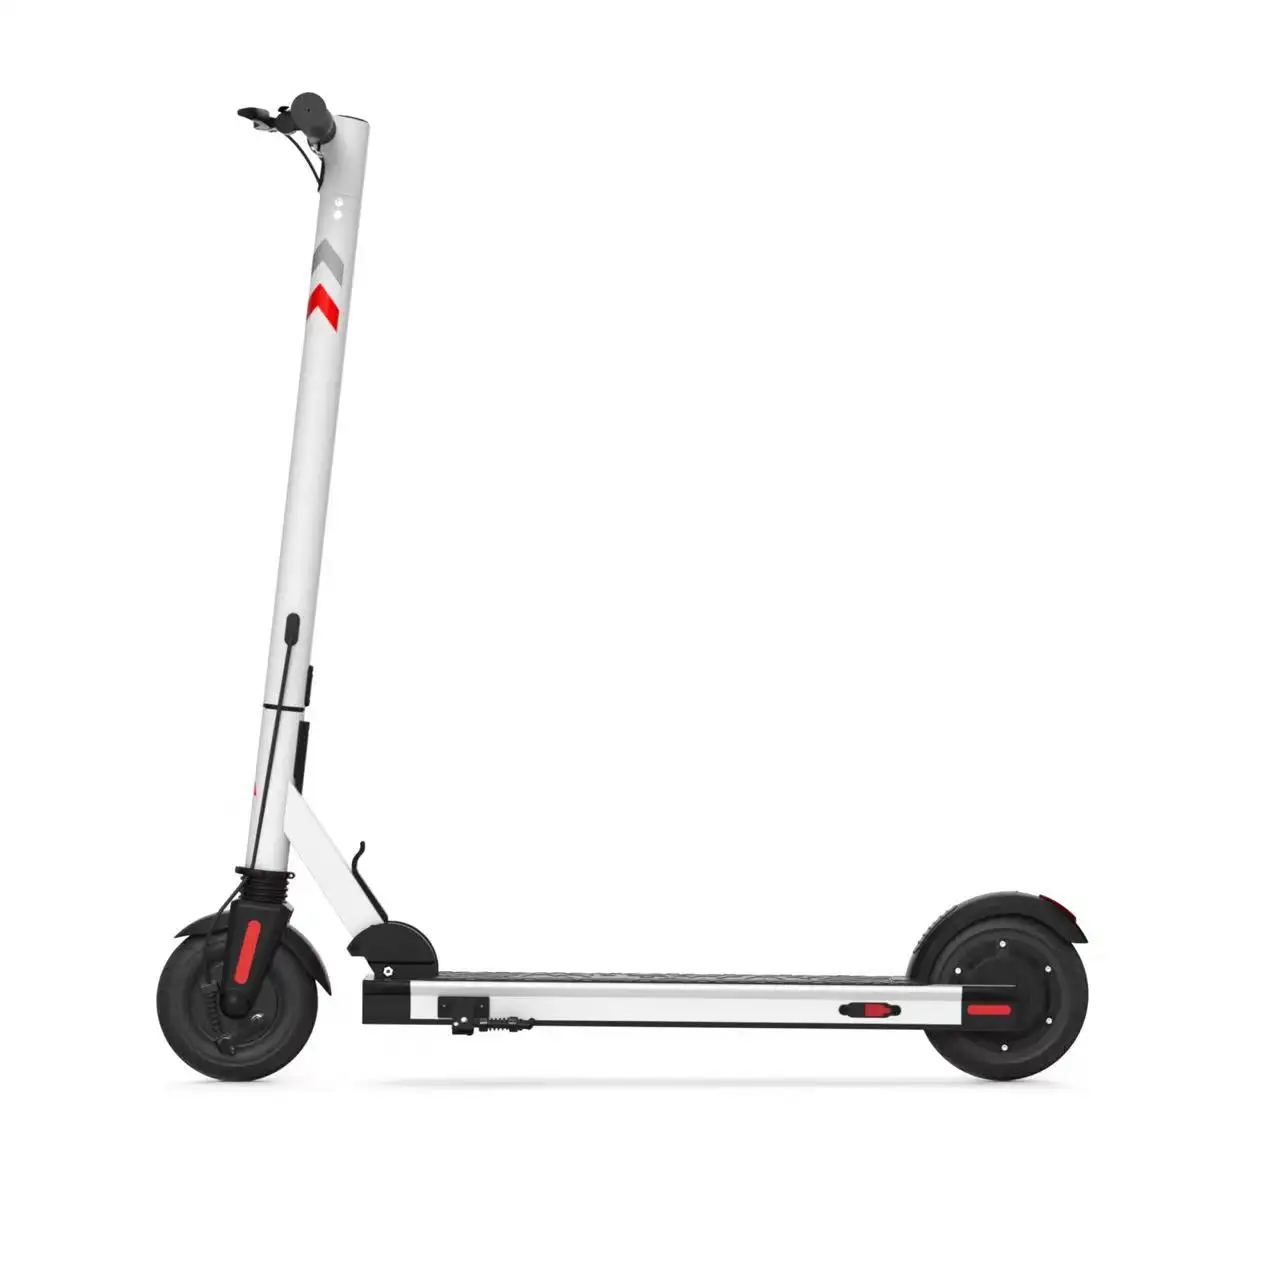 Original New E-Scooter Smooth Operation Works right out of the box 2 Wheels Citycoco 36V